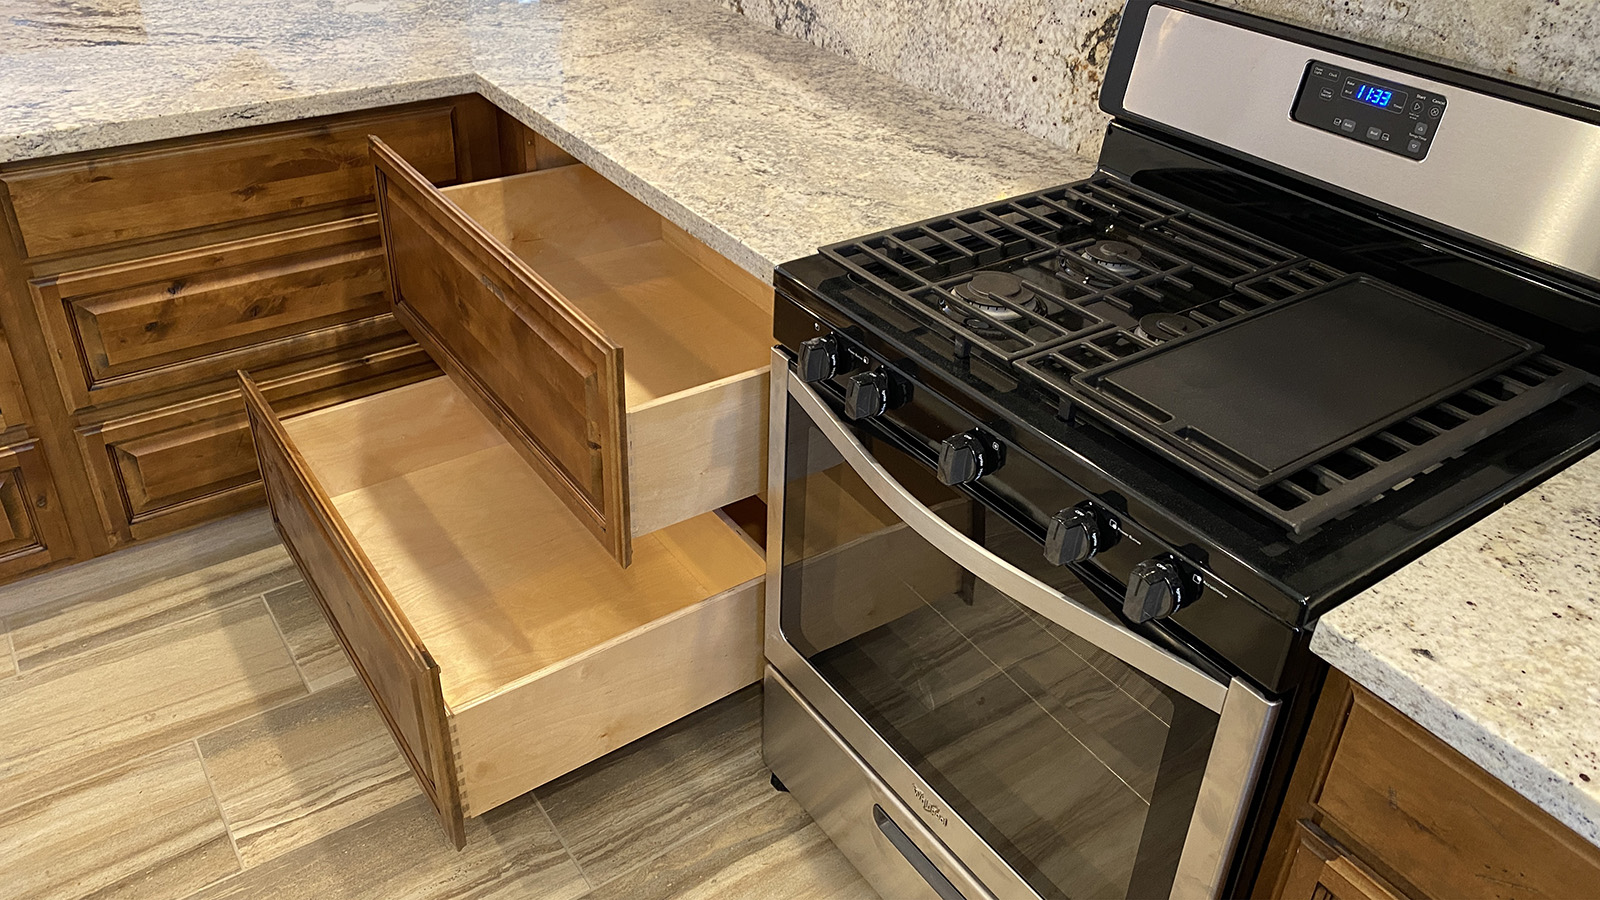 Larger drawers for pots and pans